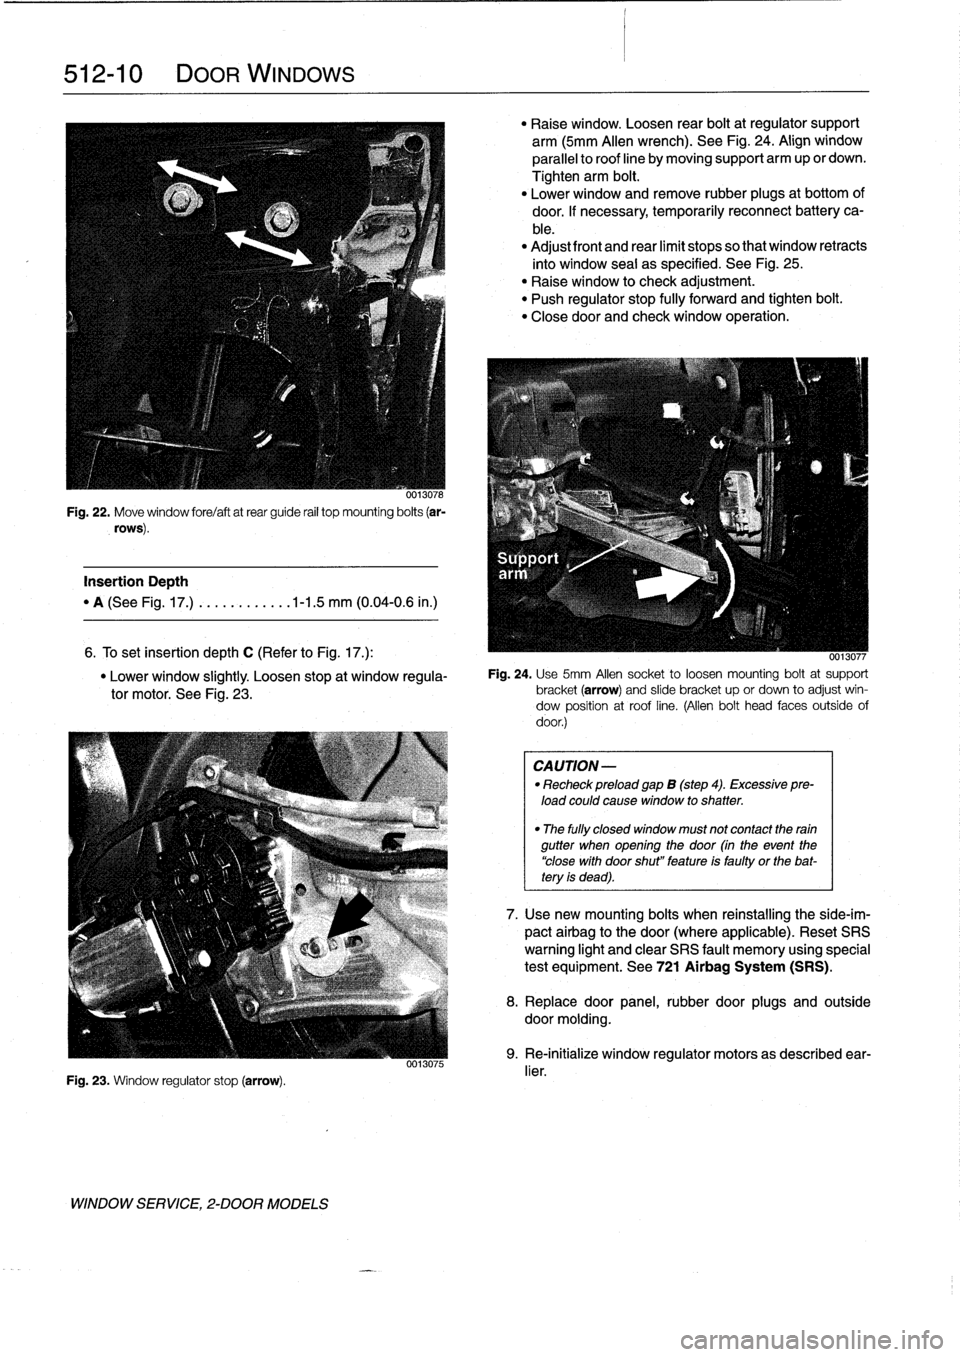 BMW 328i 1992 E36 Workshop Manual 
512-
1
0

	

DOOR
WINDOWS

0013078

Fig
.
22
.
Move
window
fore/aftatrear
guide
rail
top
mounting
bolts
(ar-

rows)
.

Insertion
Depth

"
A
(See
Fig
.
17
.)
.
..........
.1-1
.5
mm
(0
.04-0
.6
in
.)
